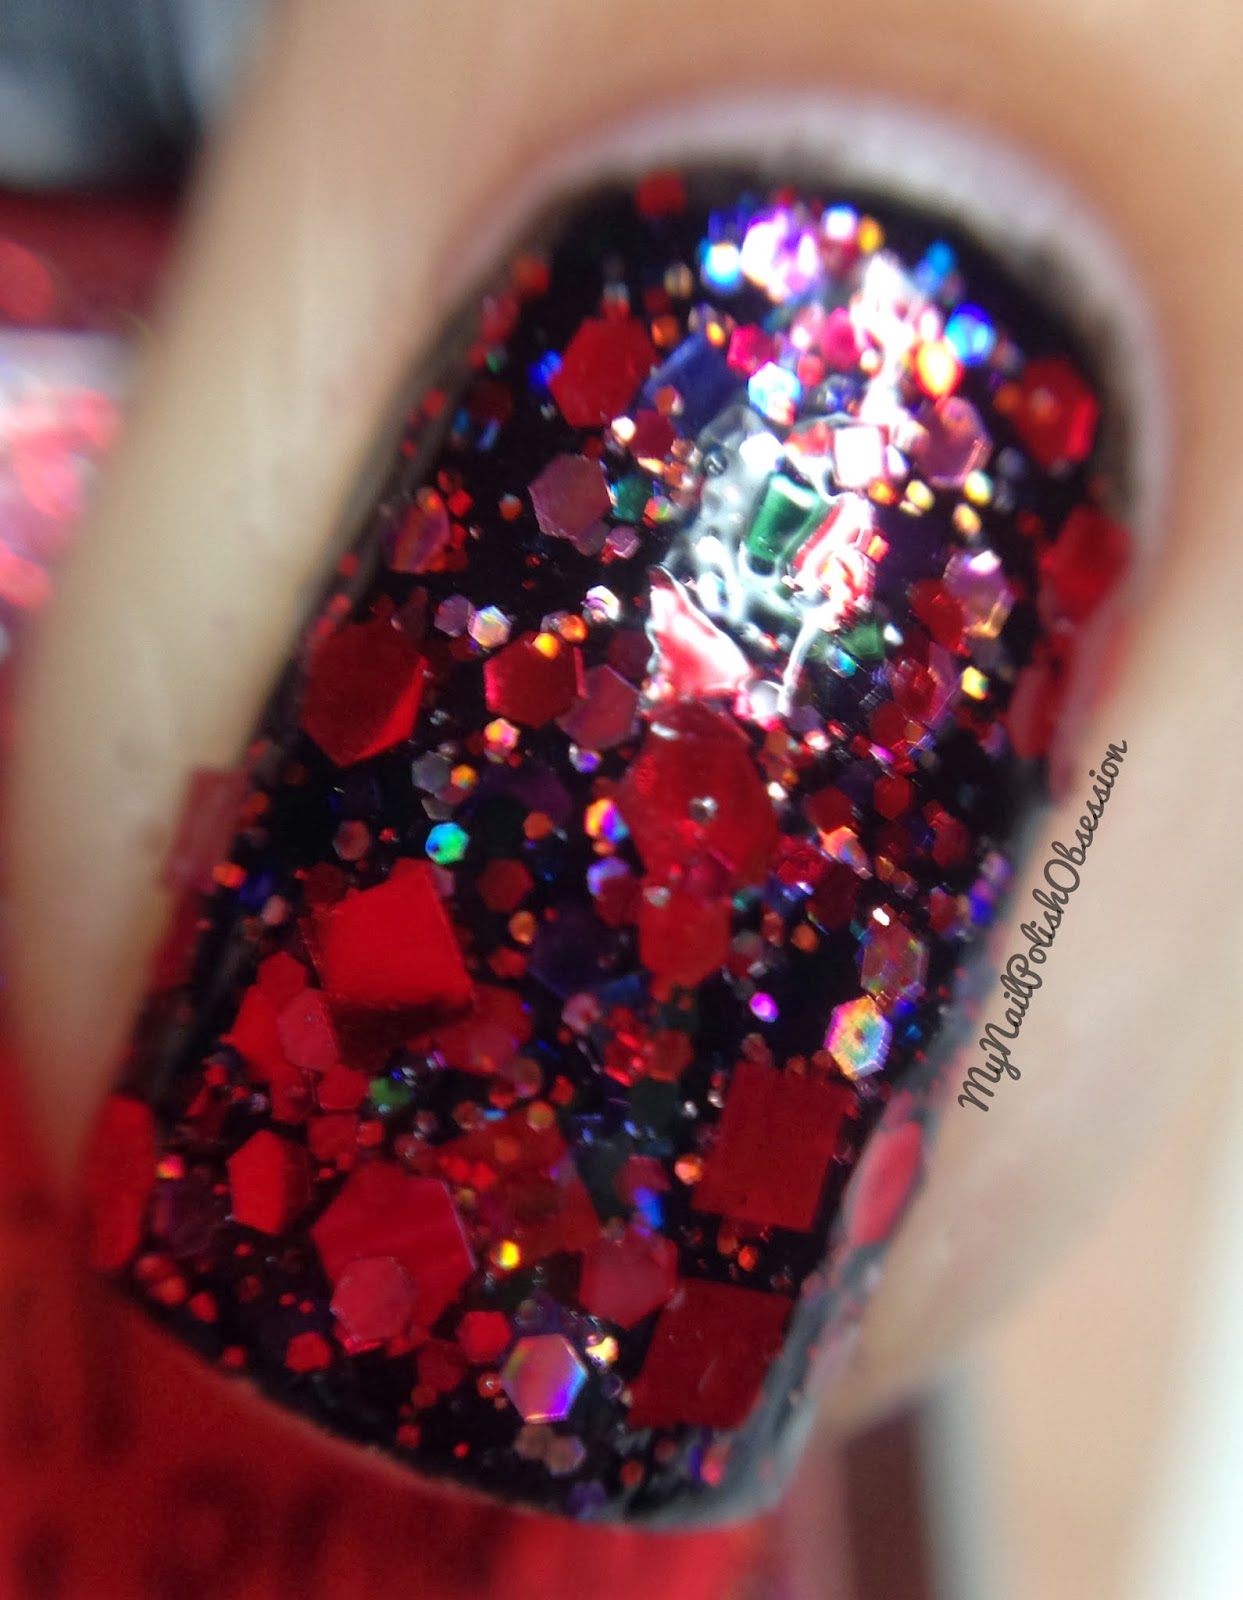 My Nail Polish Obsession: Red Hot Valentine's Day Mani!